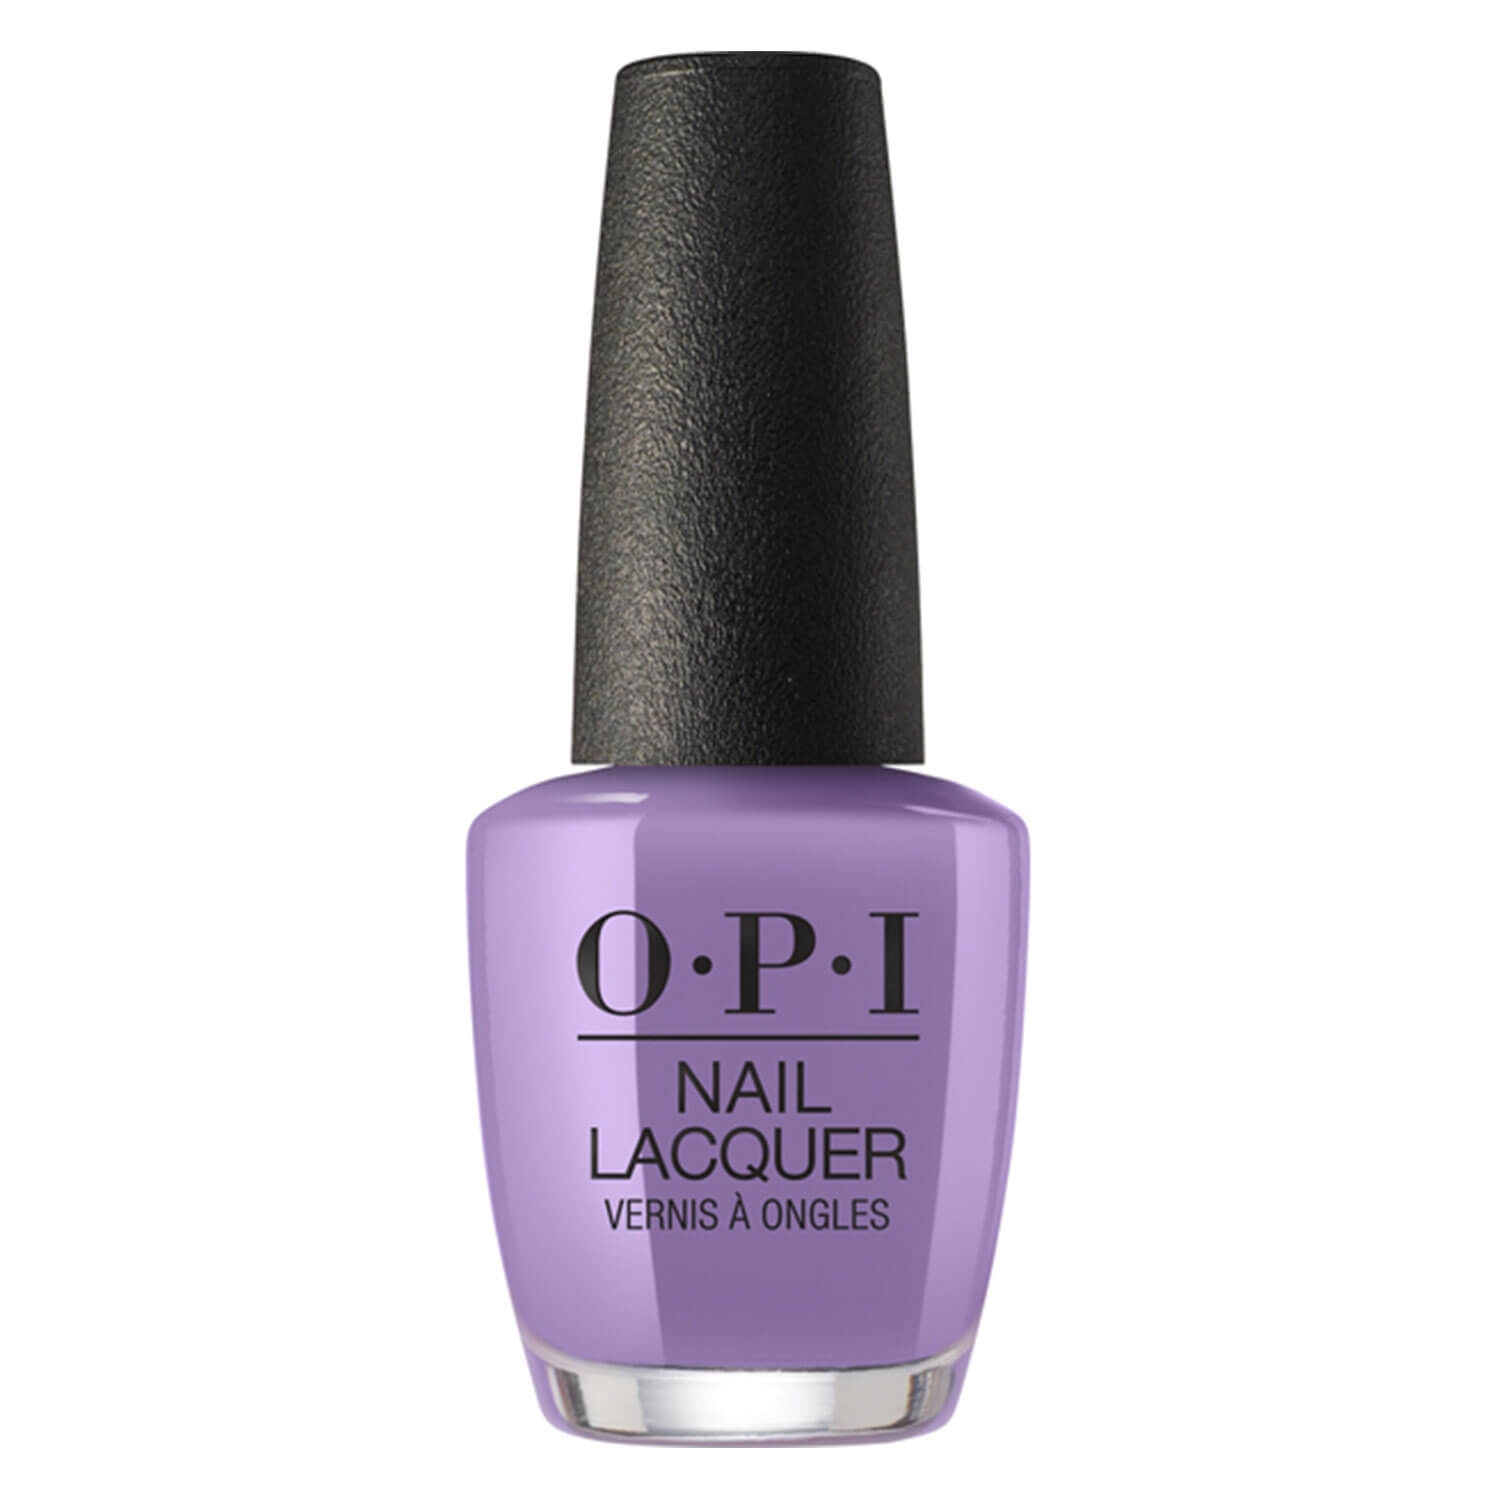 Product image from Brights - Do you lilac it?